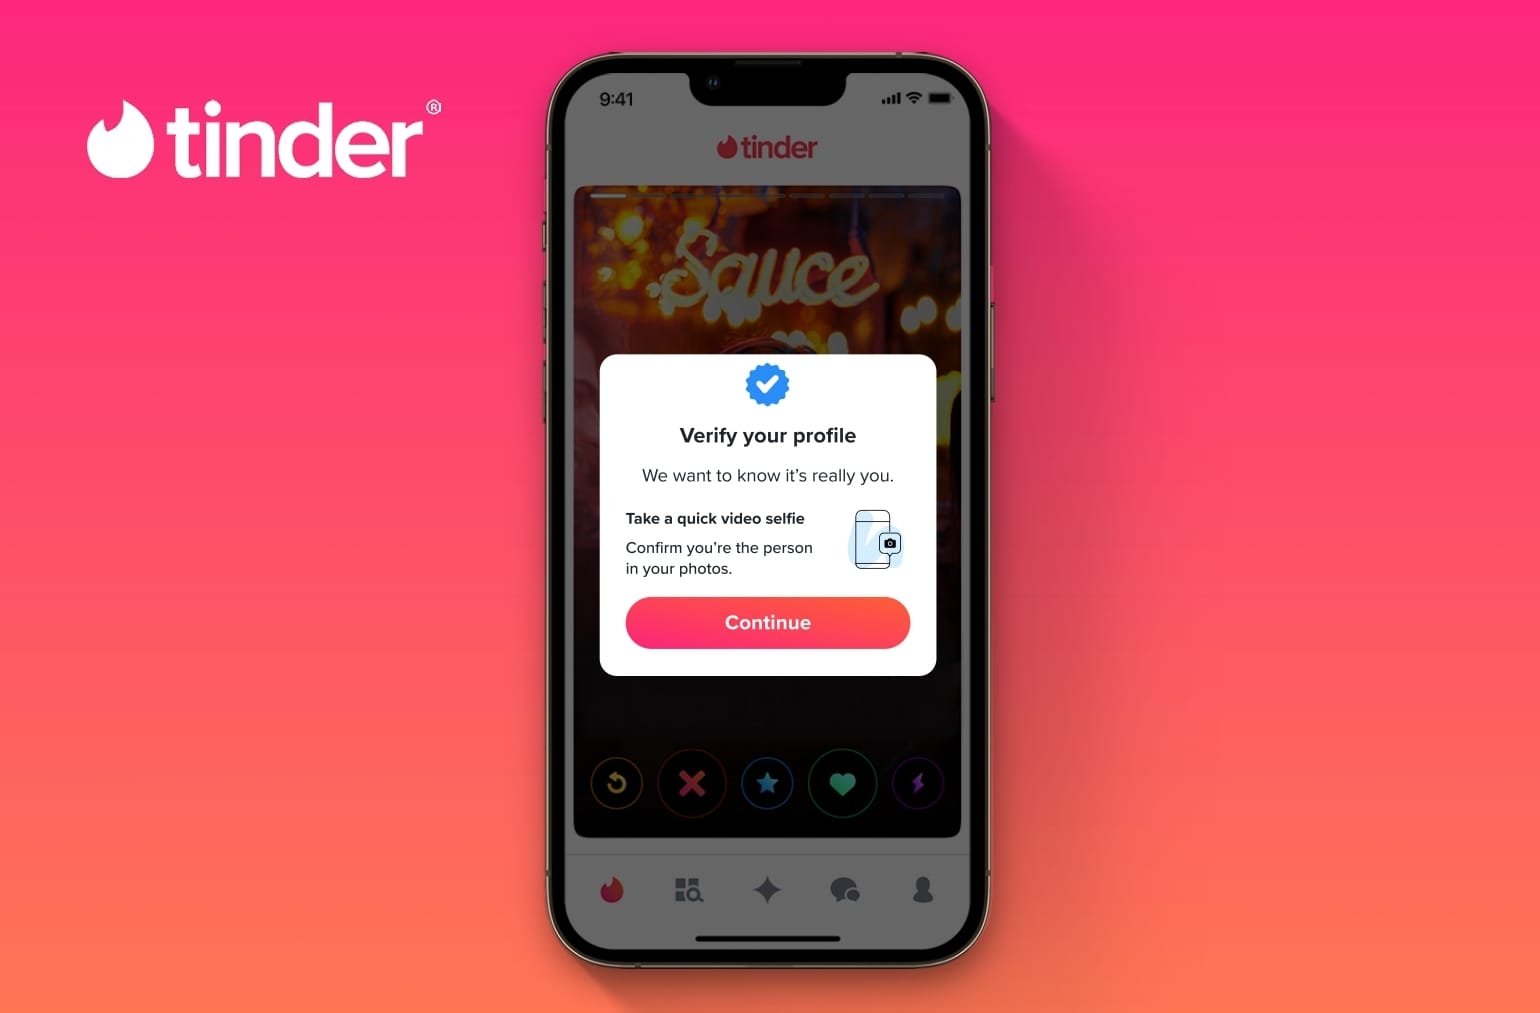 Tinder's Photo Verification to ask users take selfie video